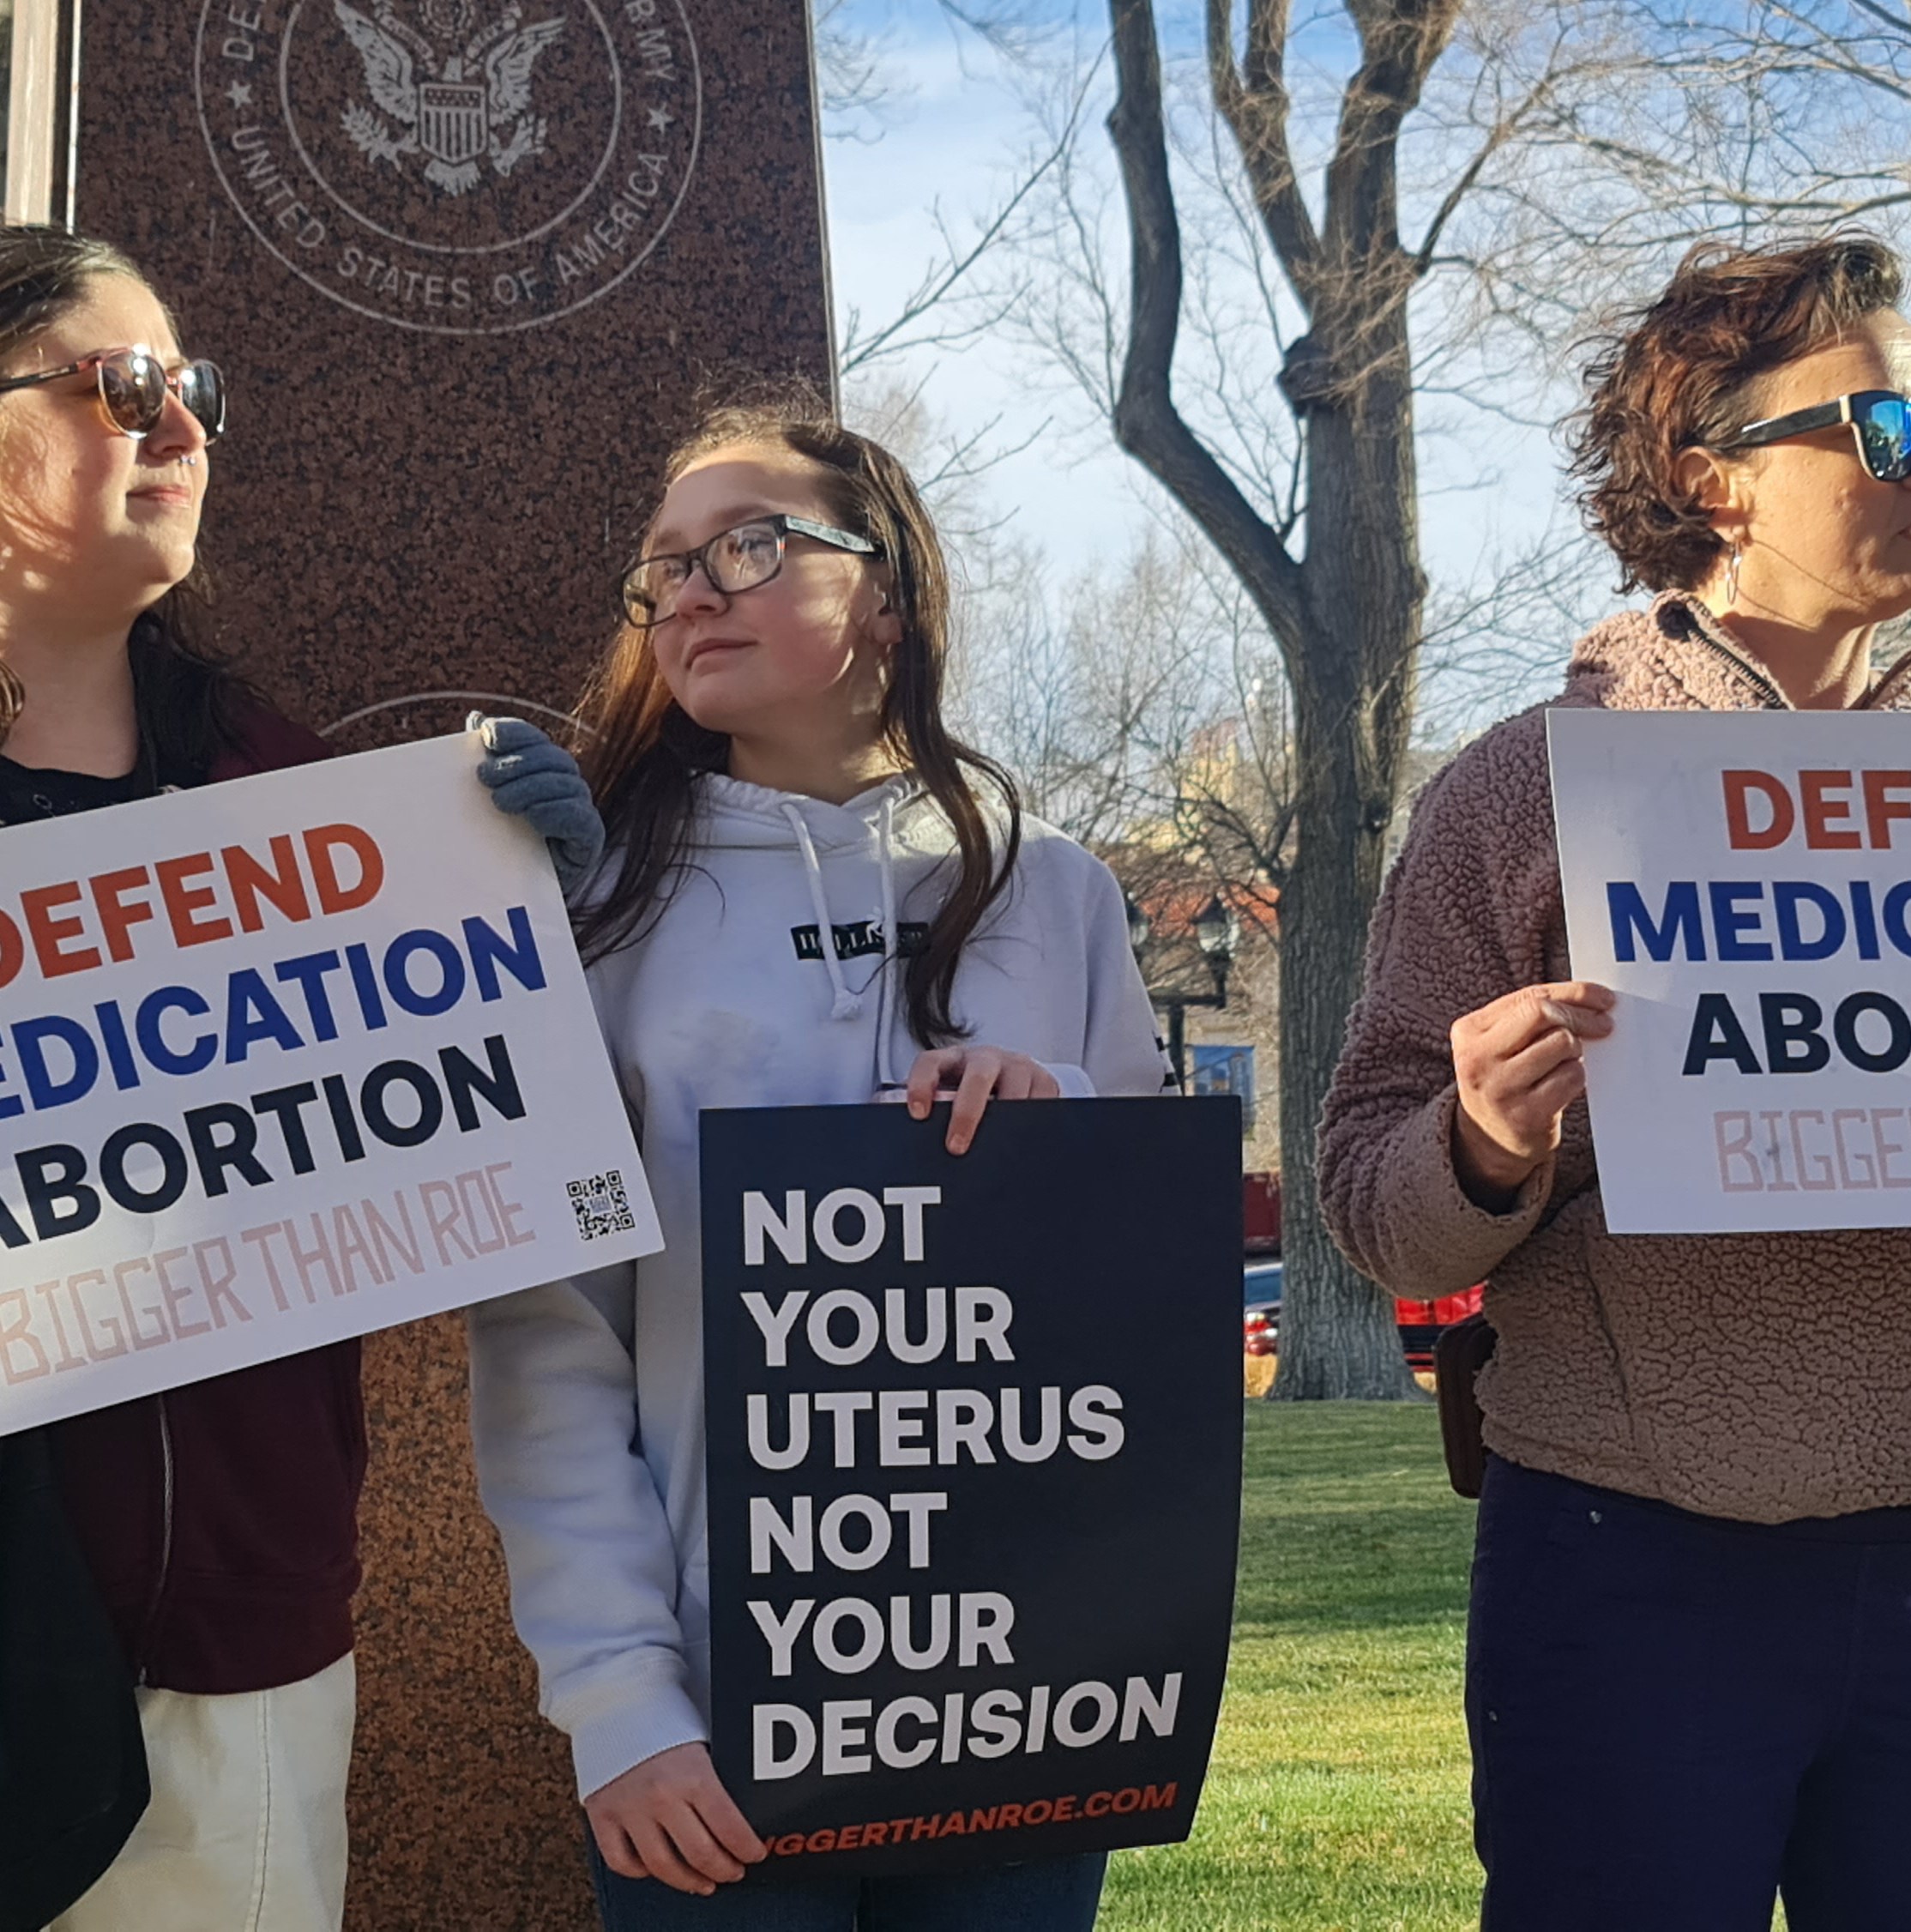 Abortion medication in America: News and updates